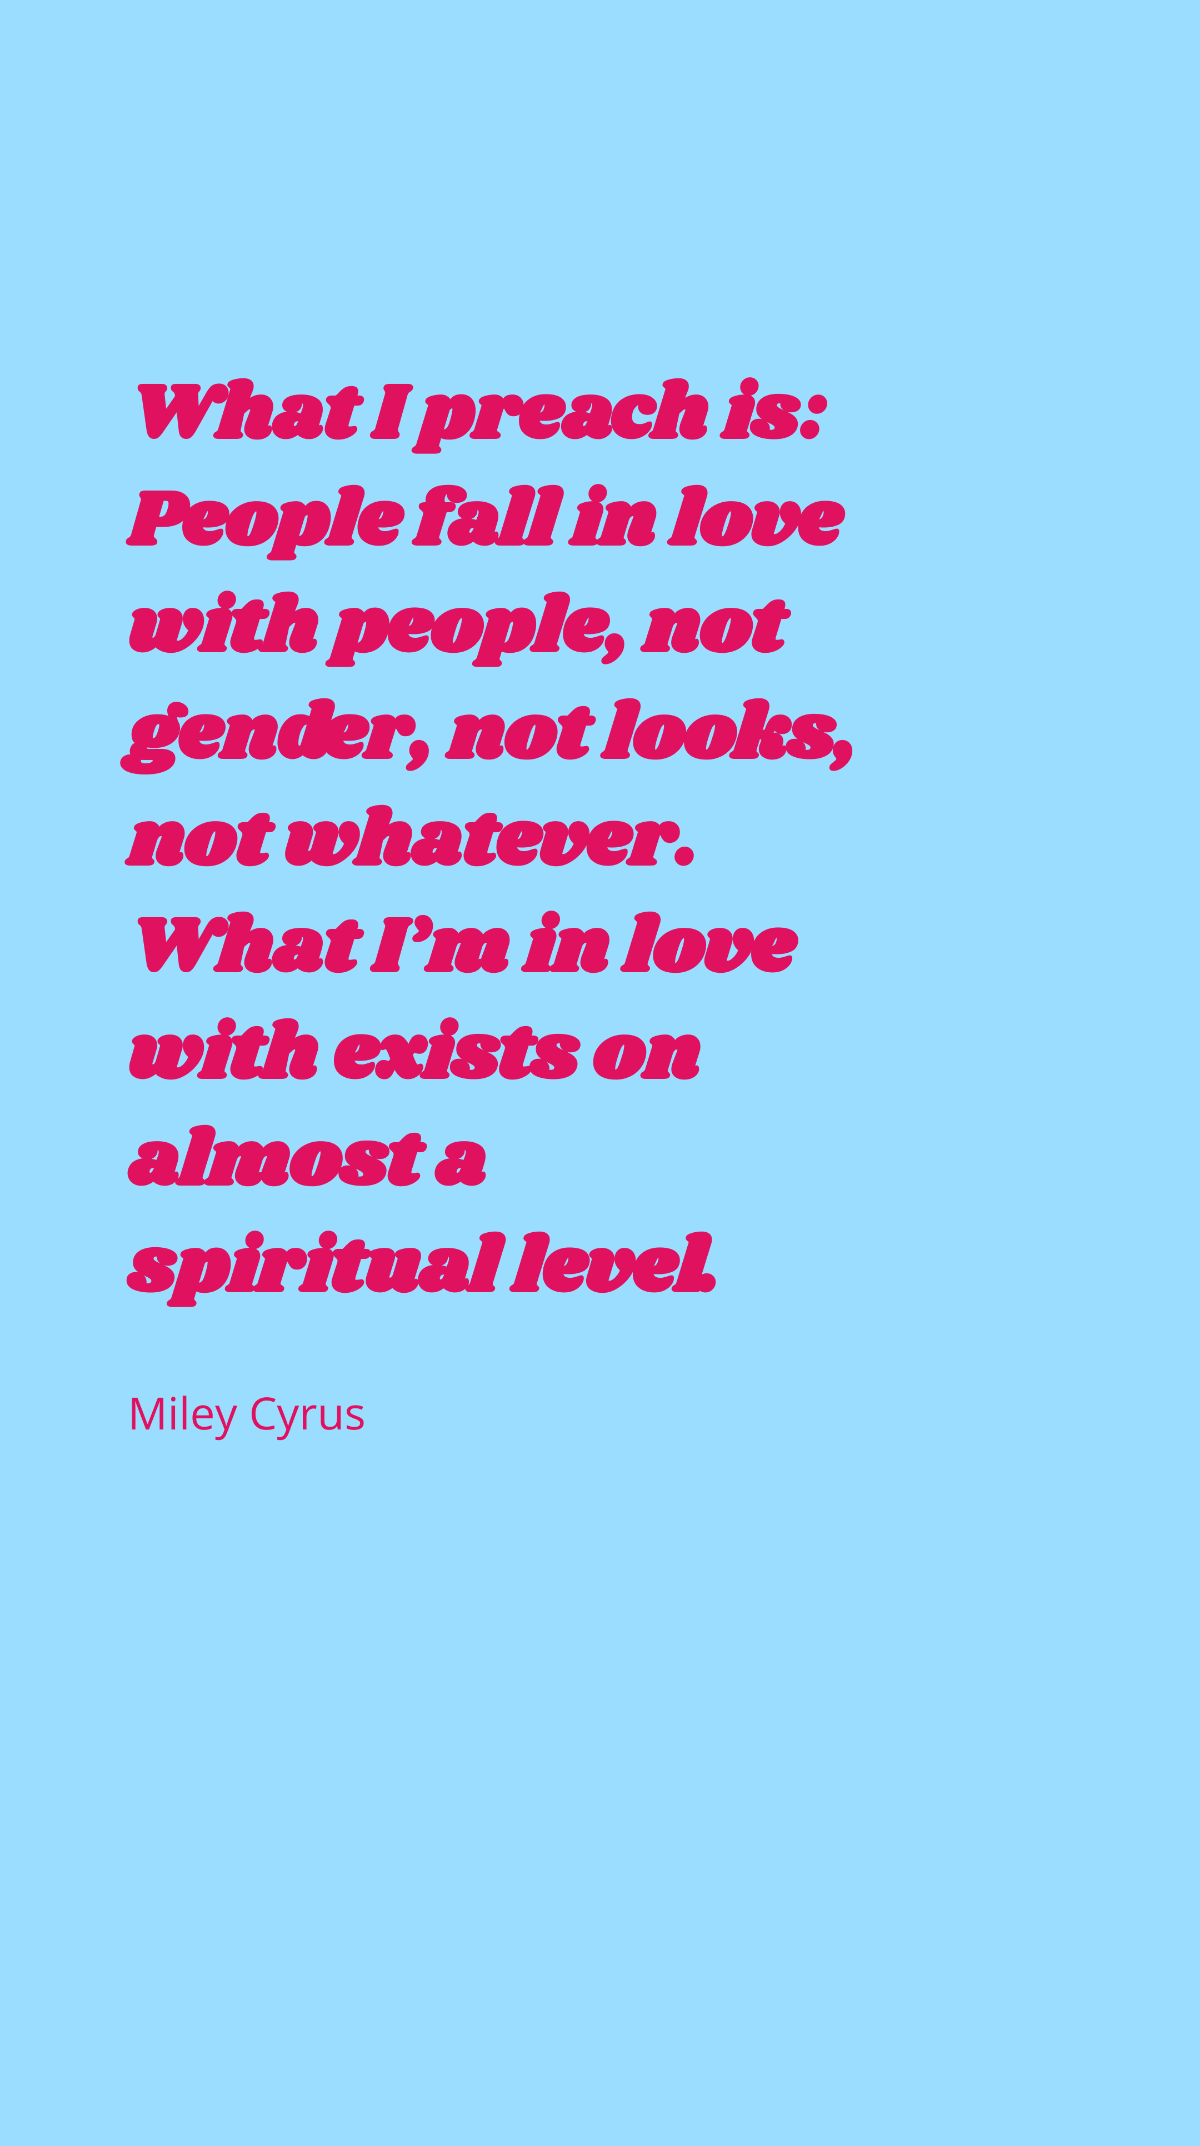 Miley Cyrus - What I preach is: People fall in love with people, not gender, not looks, not whatever. What I’m in love with exists on almost a spiritual level. Template